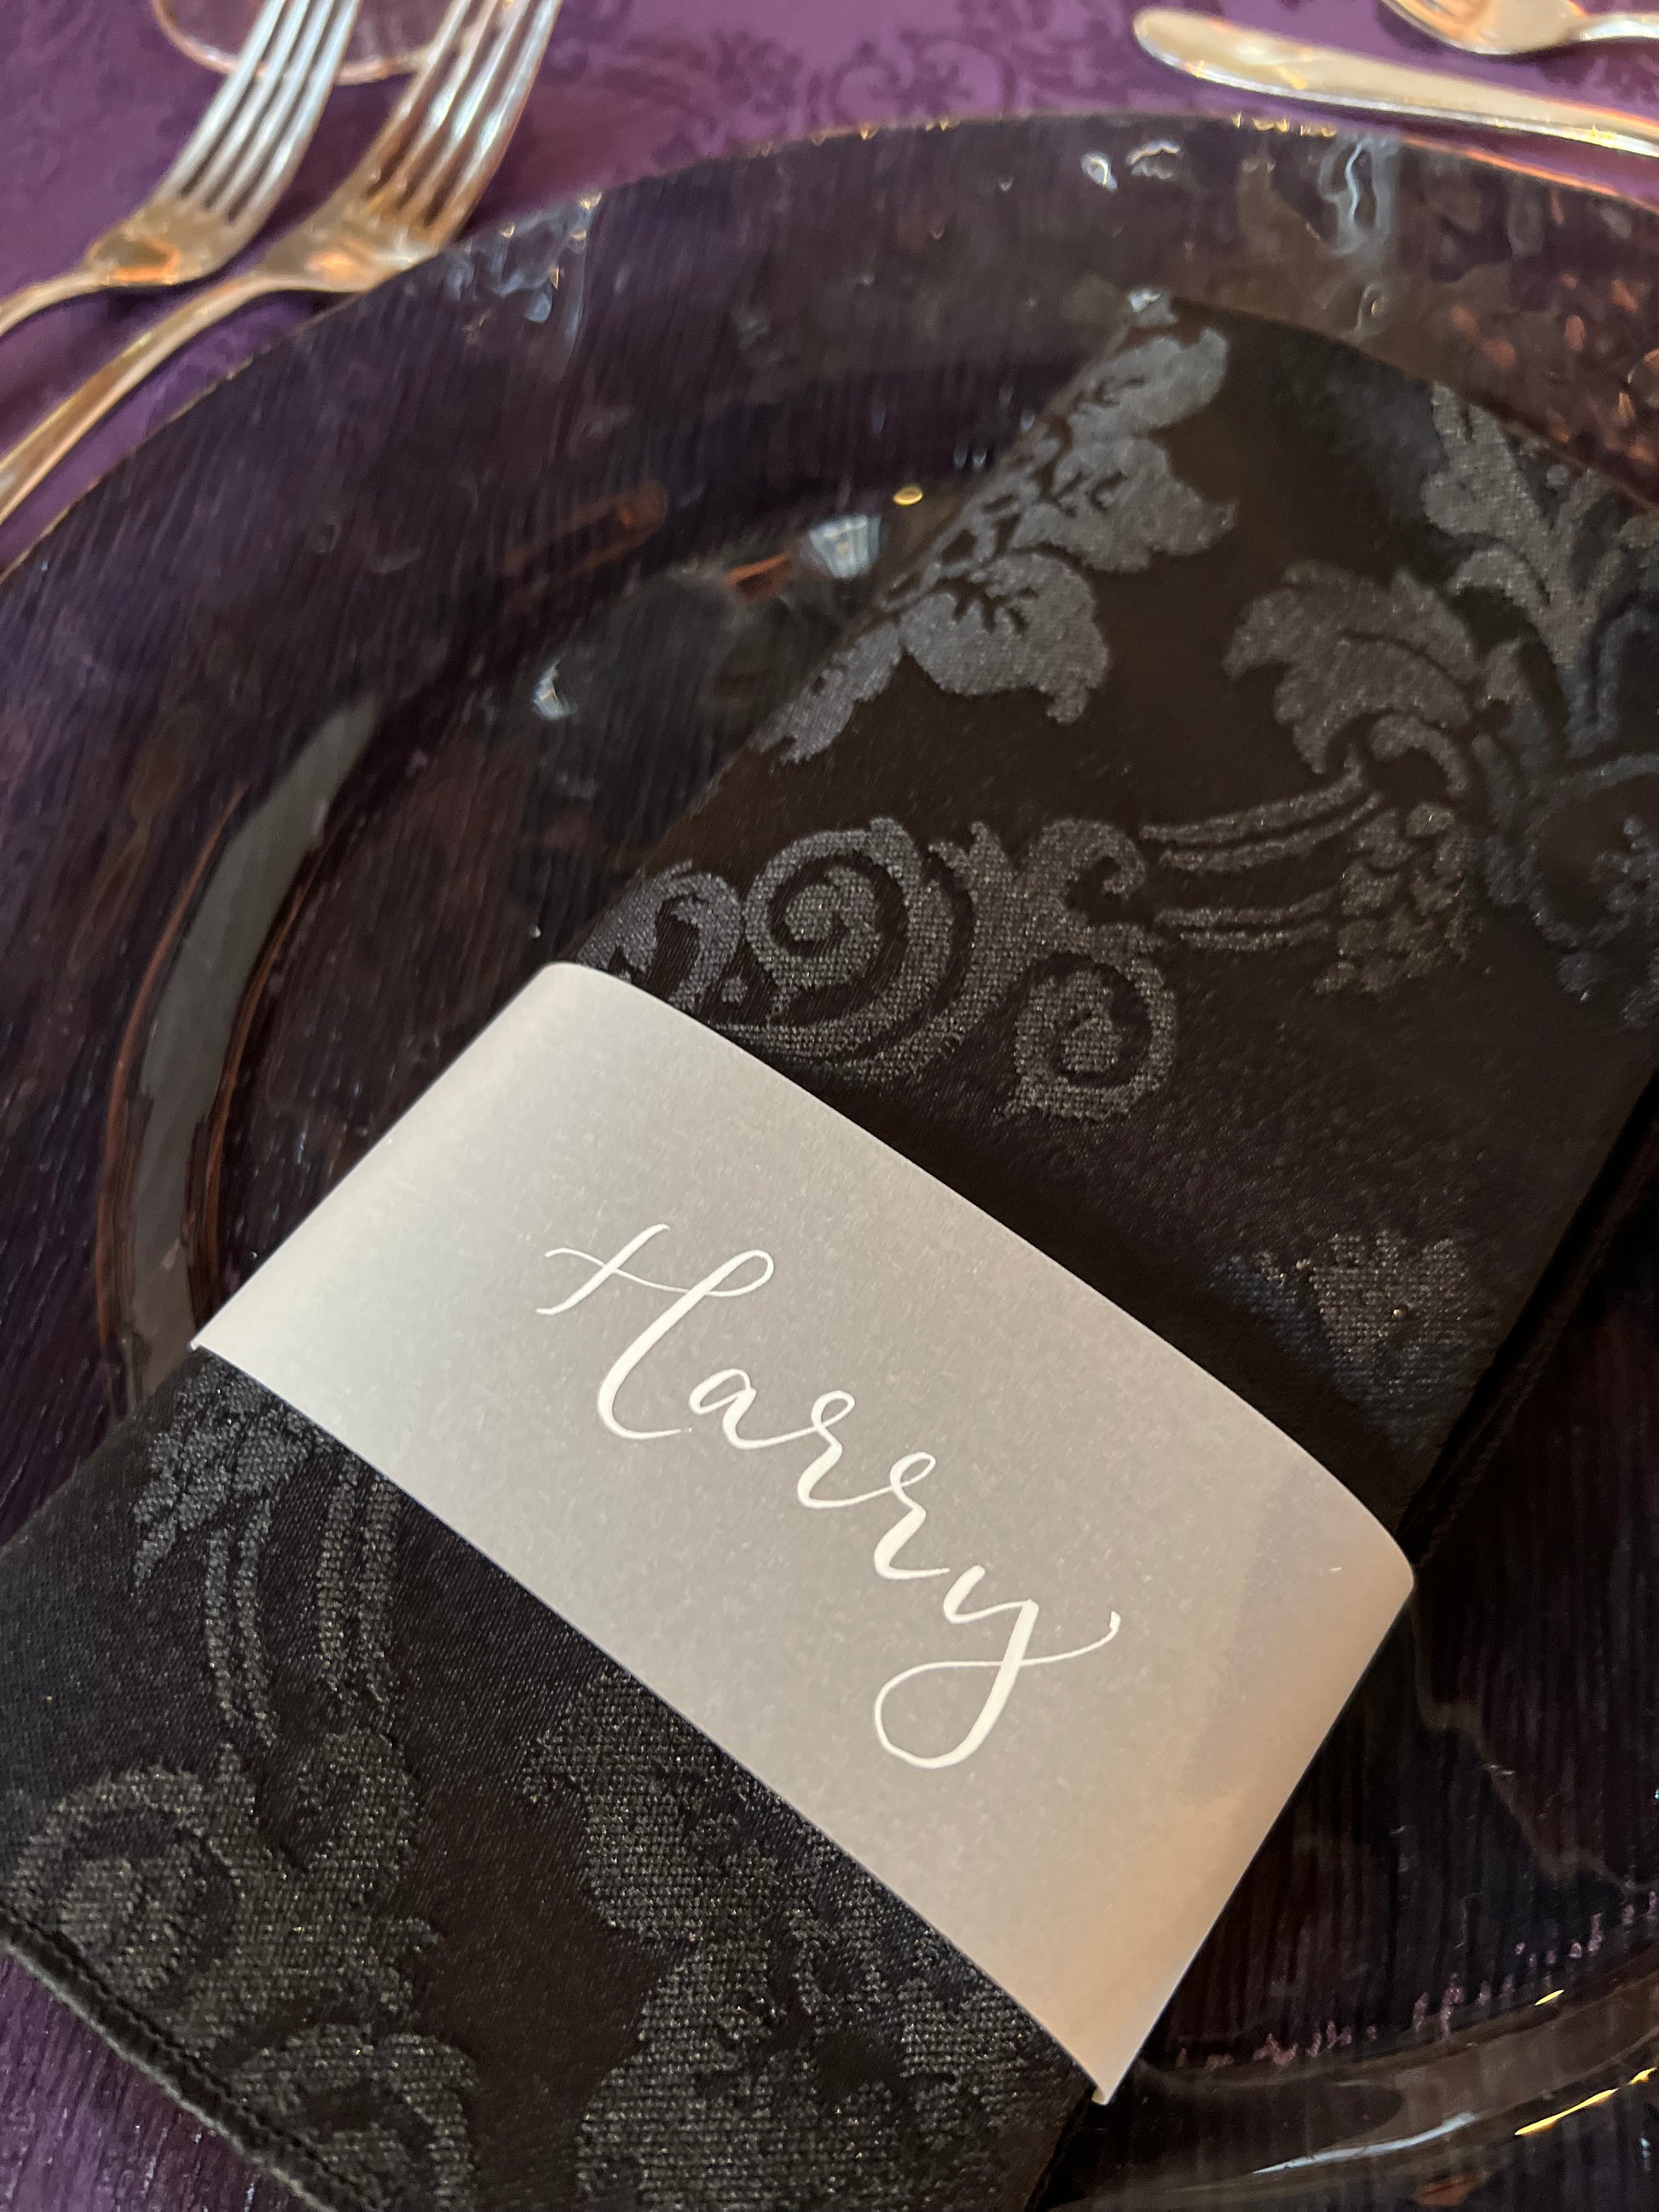 Black napkin on black charger plate with plum damask cloth, napkin finished with vellum cuff guest name 